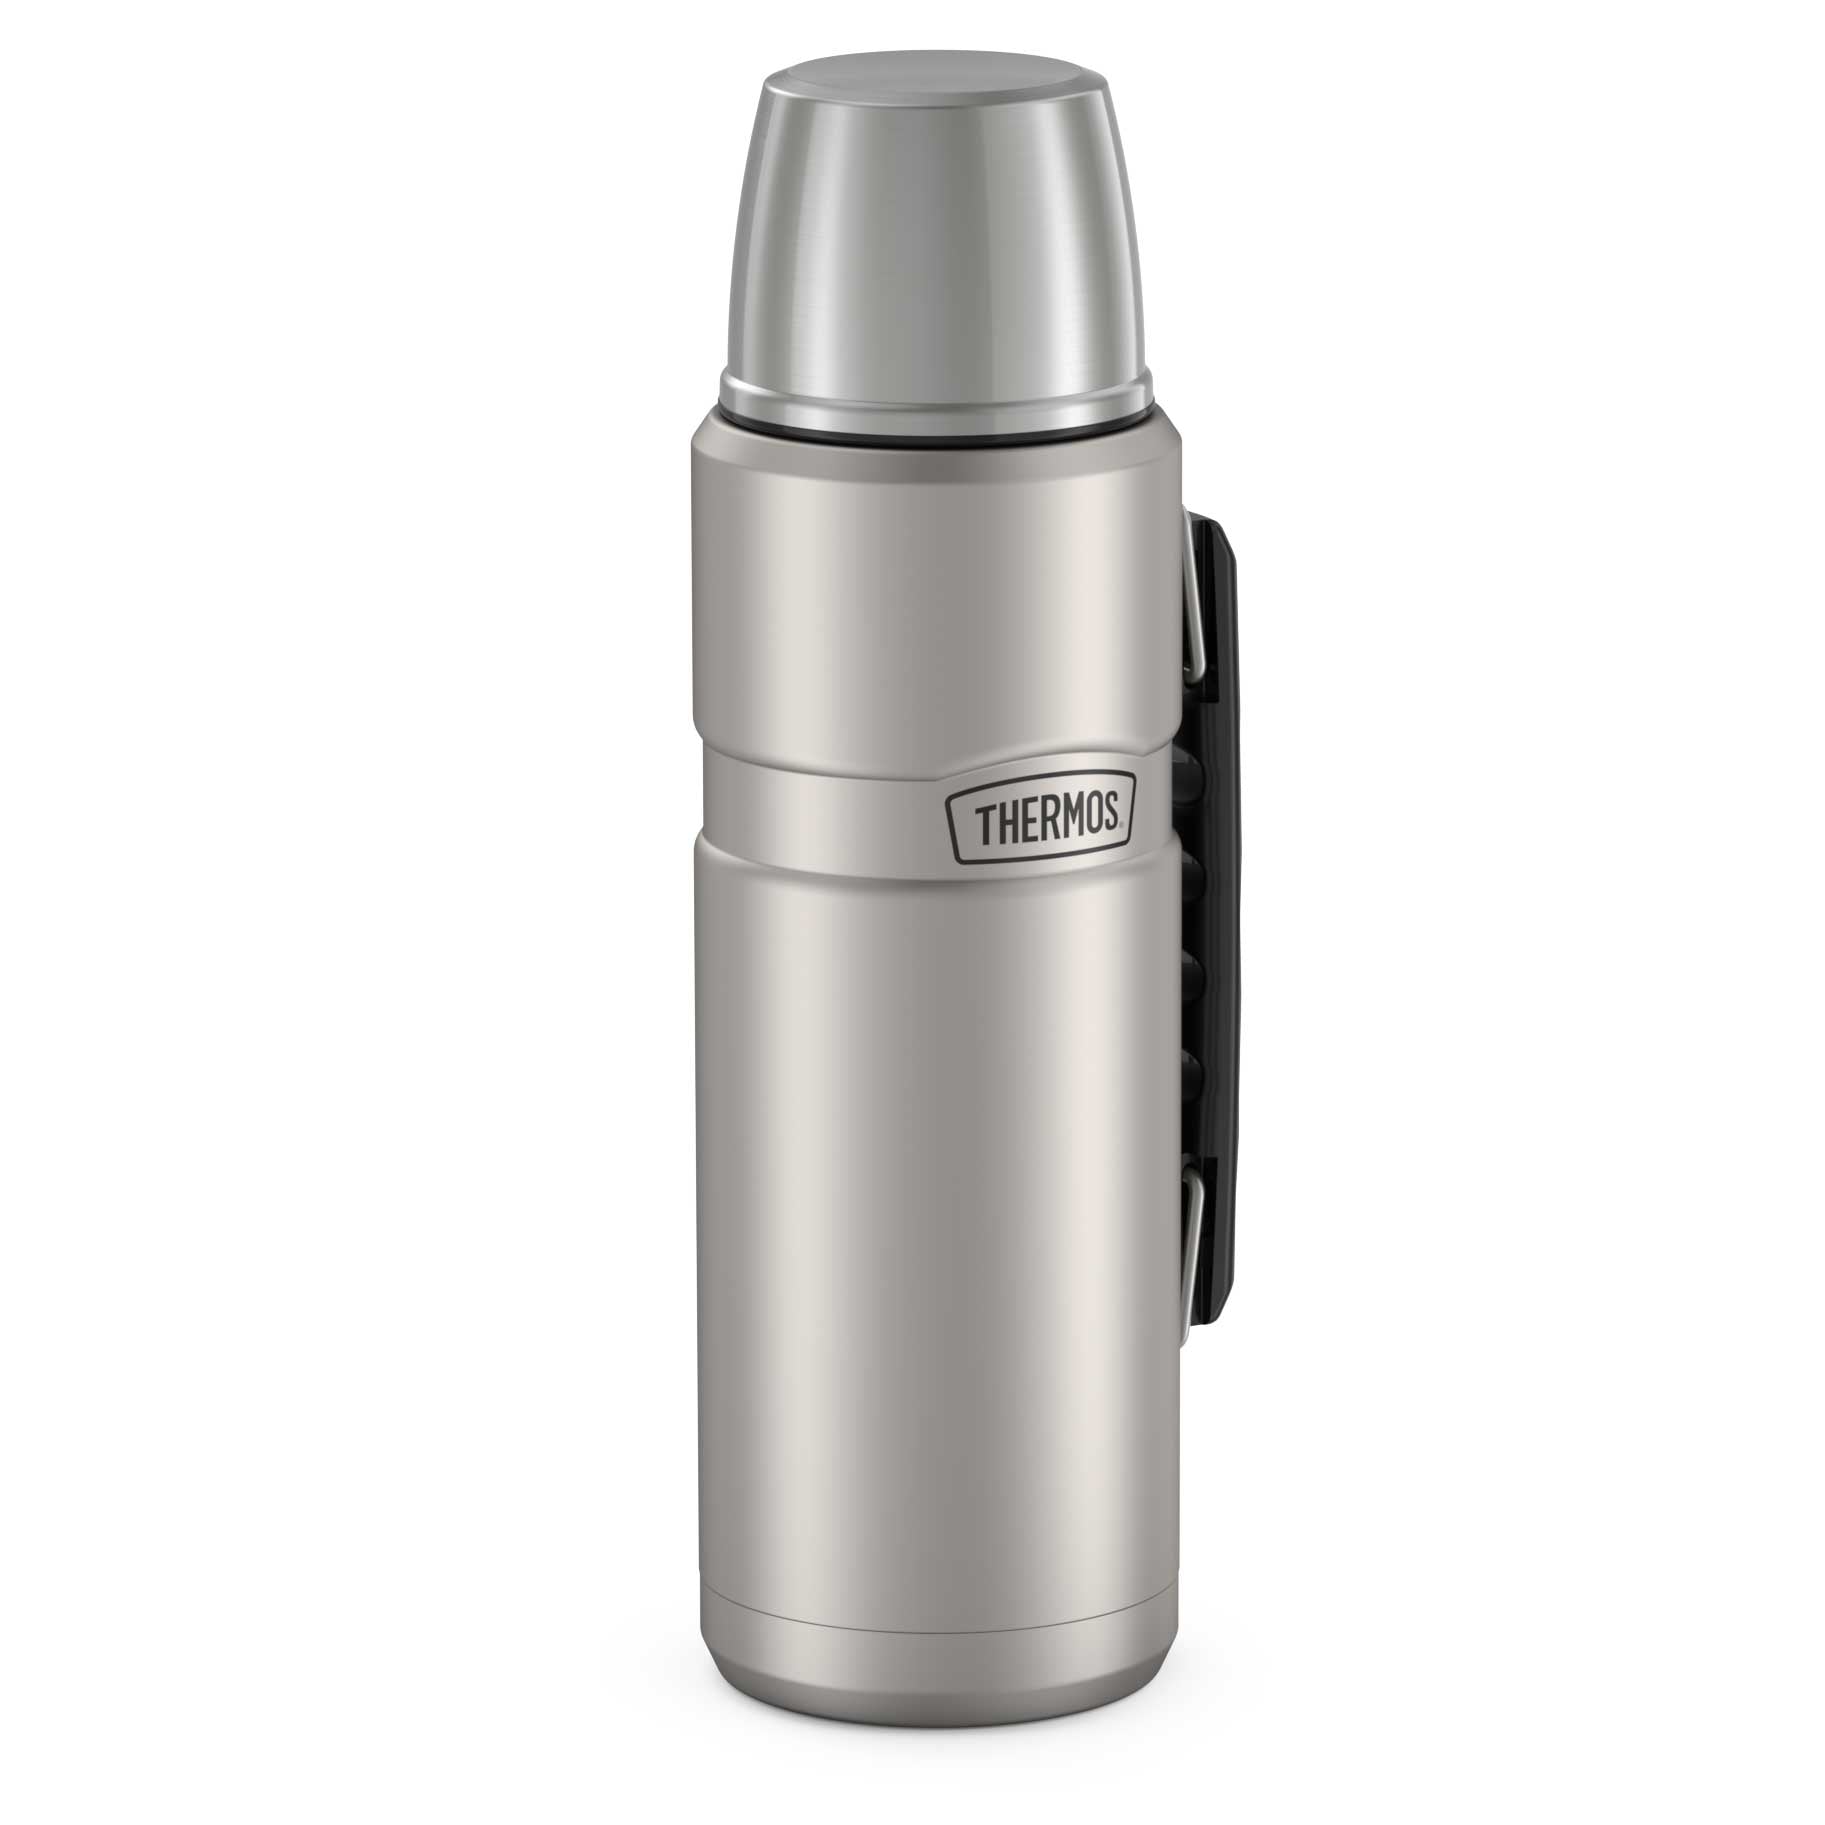 Thermos 40oz Stainless King Beverage Bottle - Midnight Blue